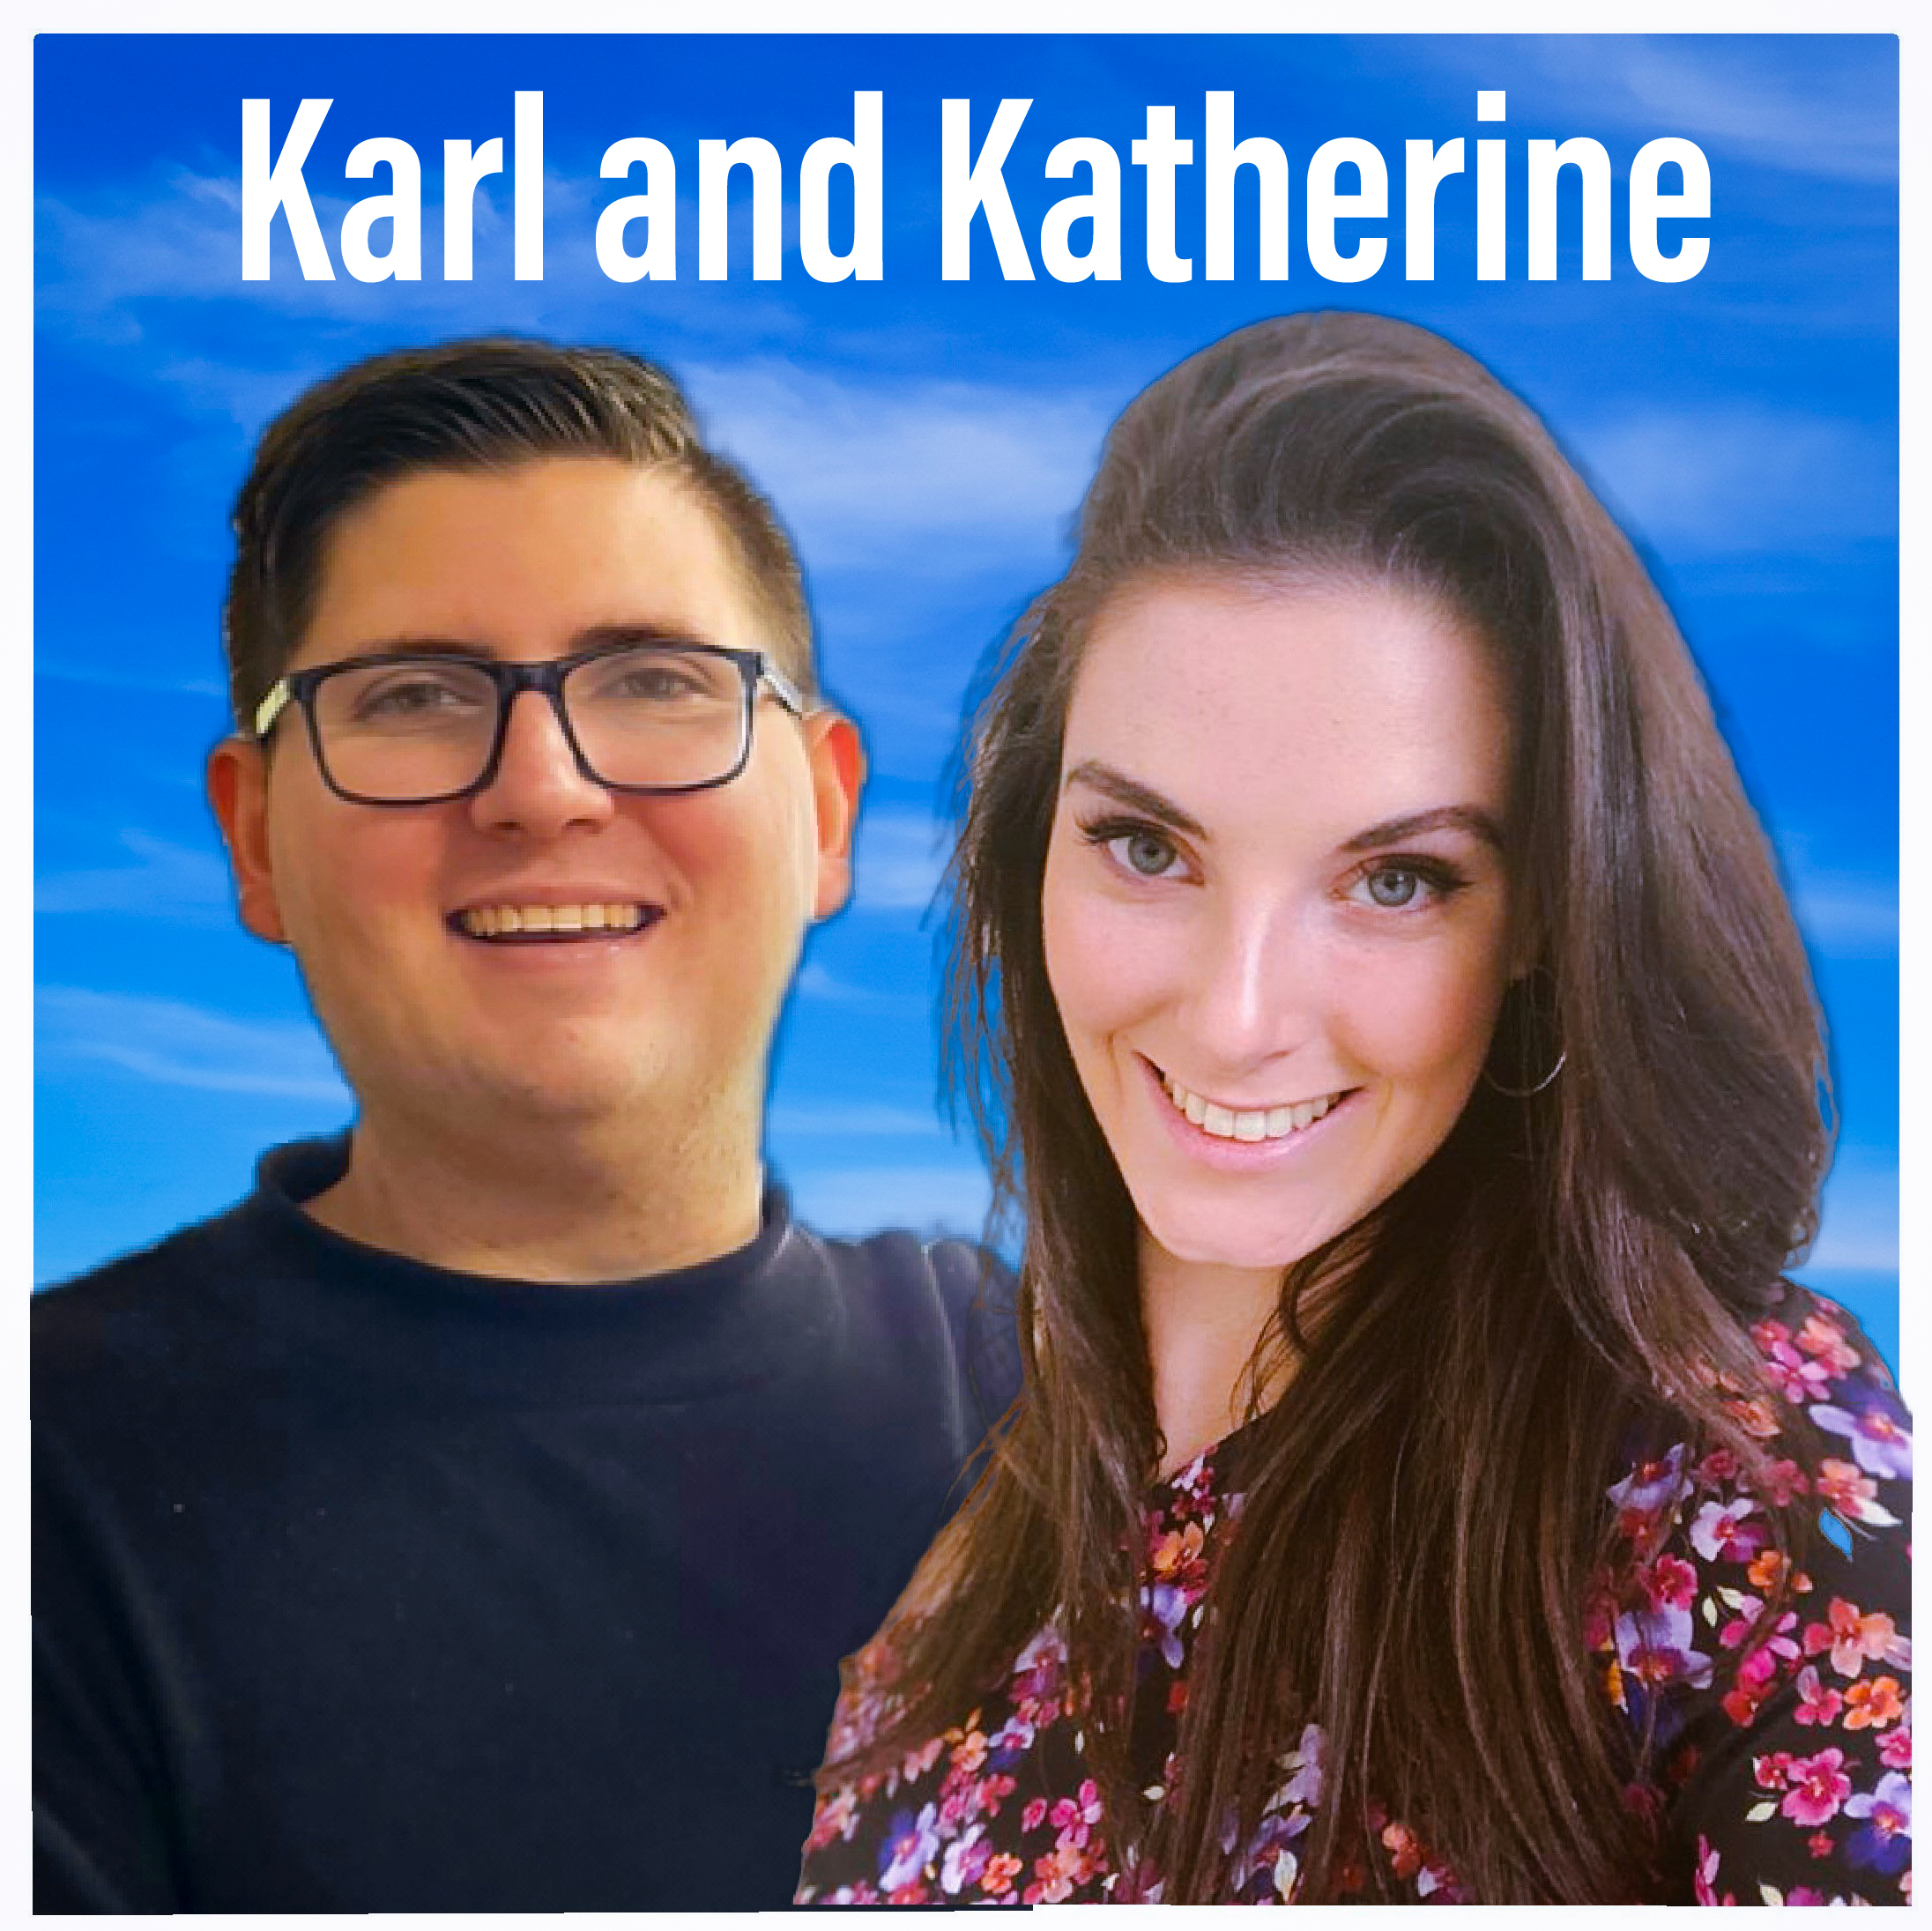 Karl and Katherine - Friday 15th October 2021